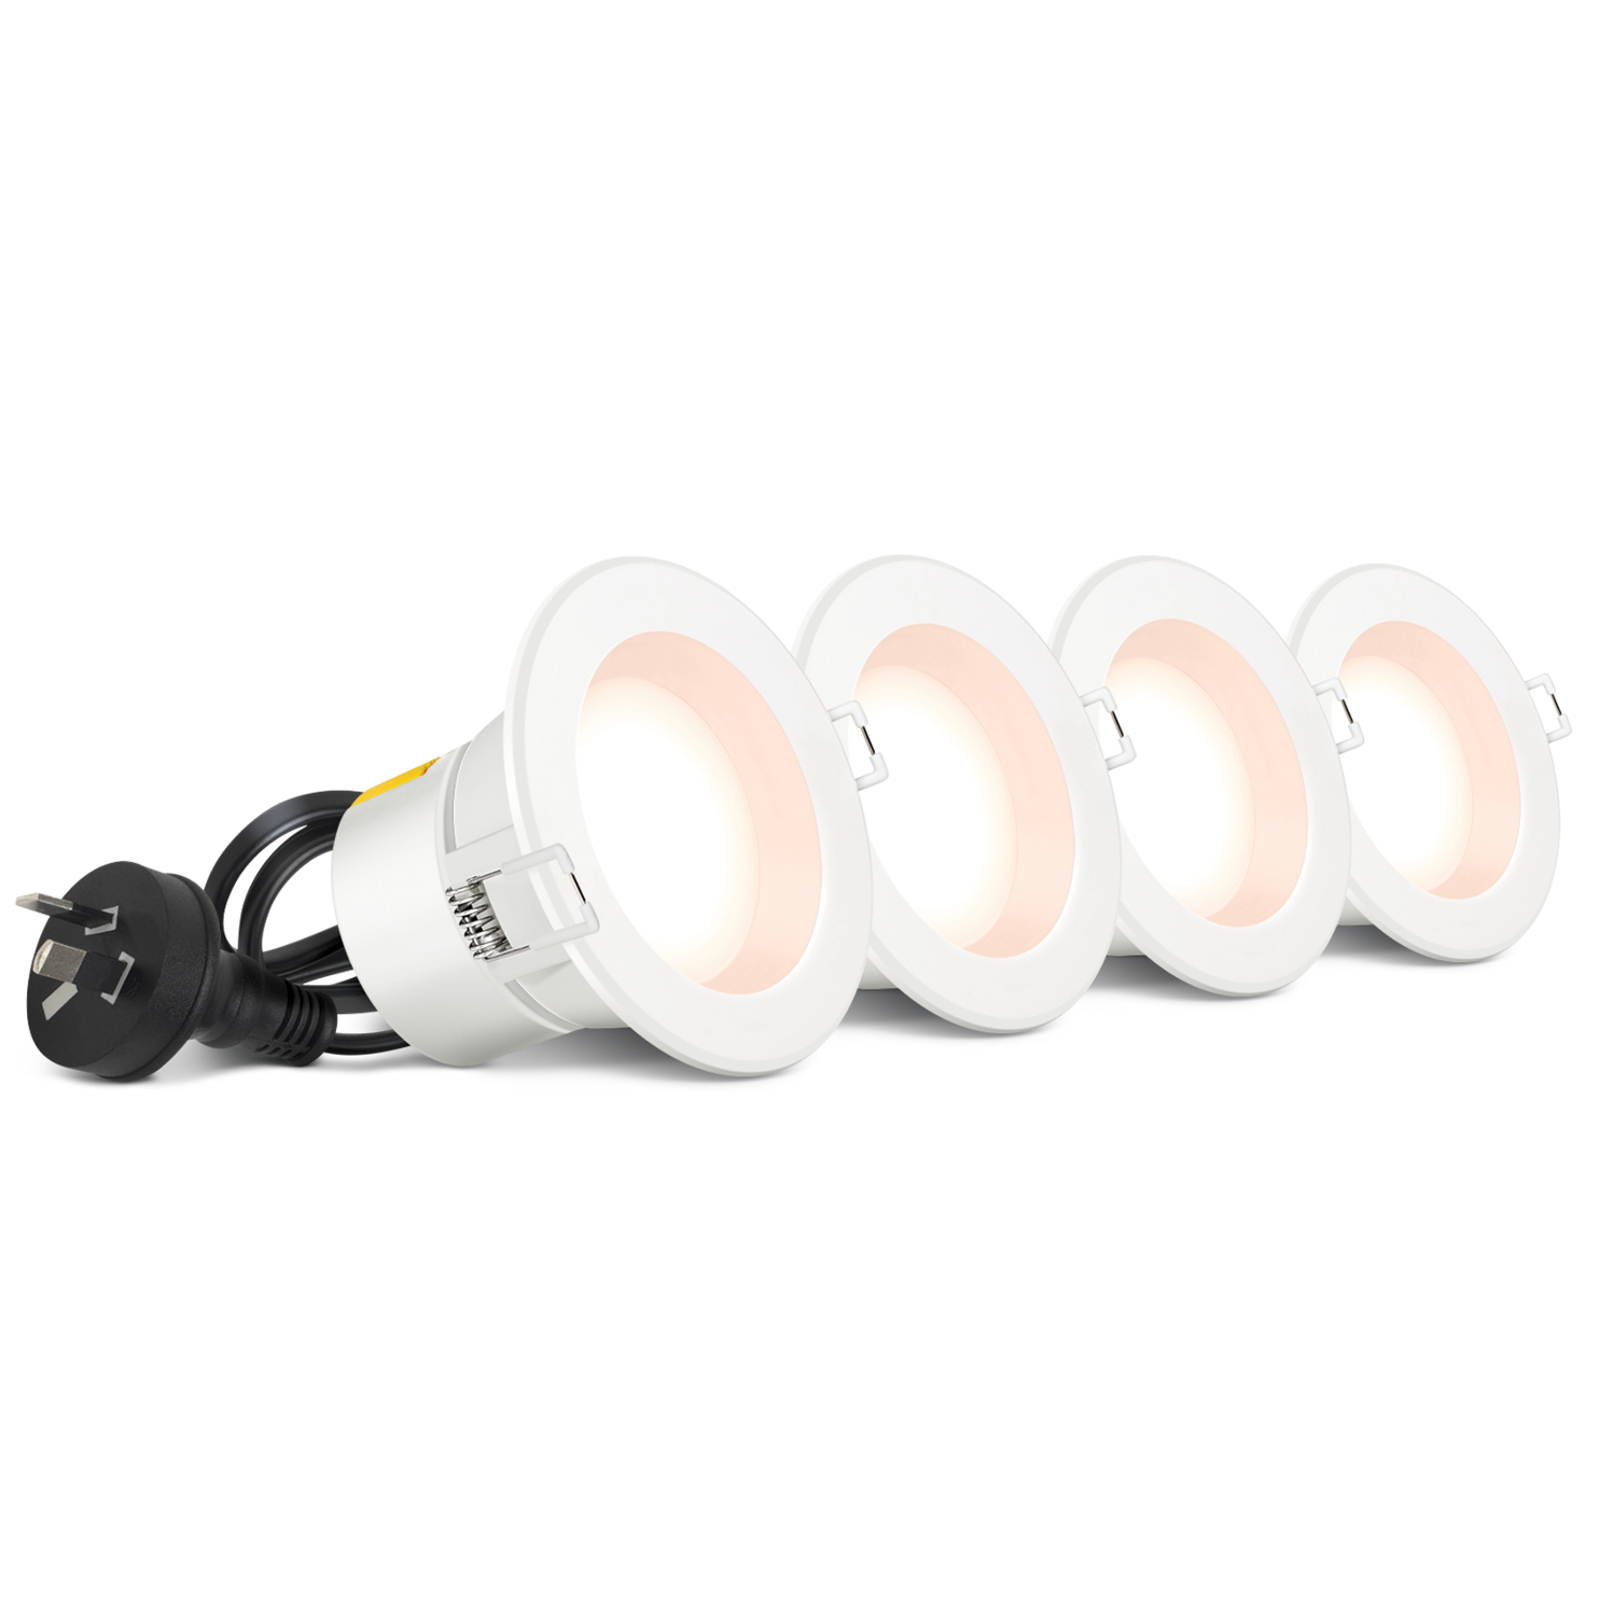 HPM 240V 5W LED 505lm Warm White Fixed Downlight - 4 Pack